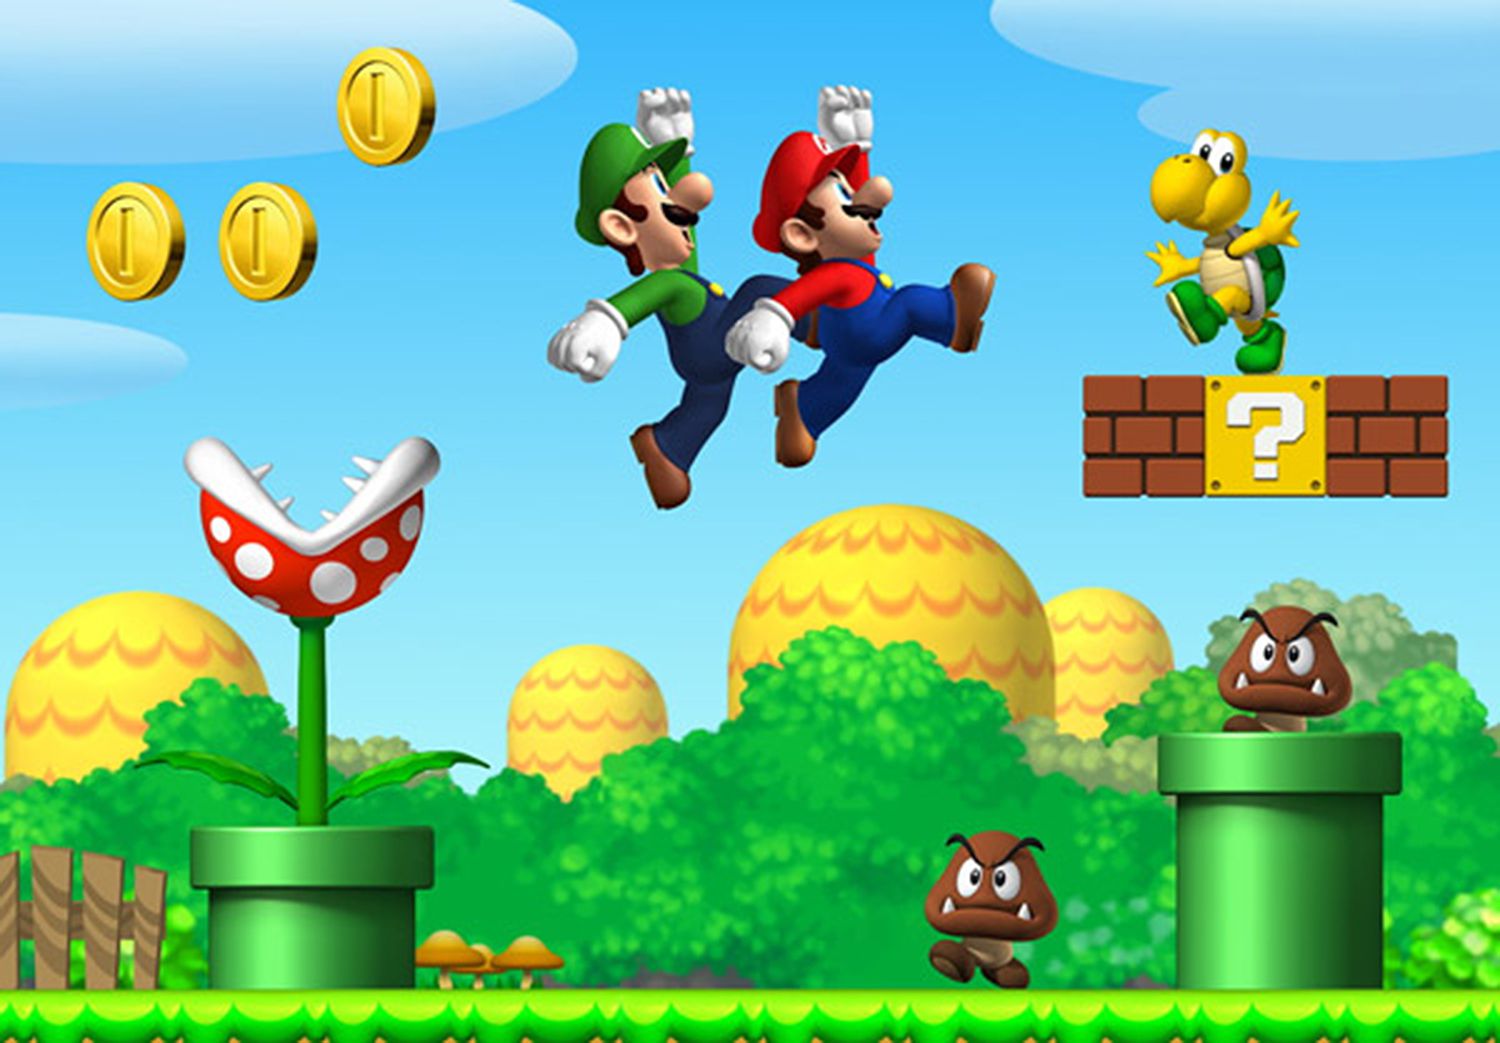 old super mario bros game free download for android